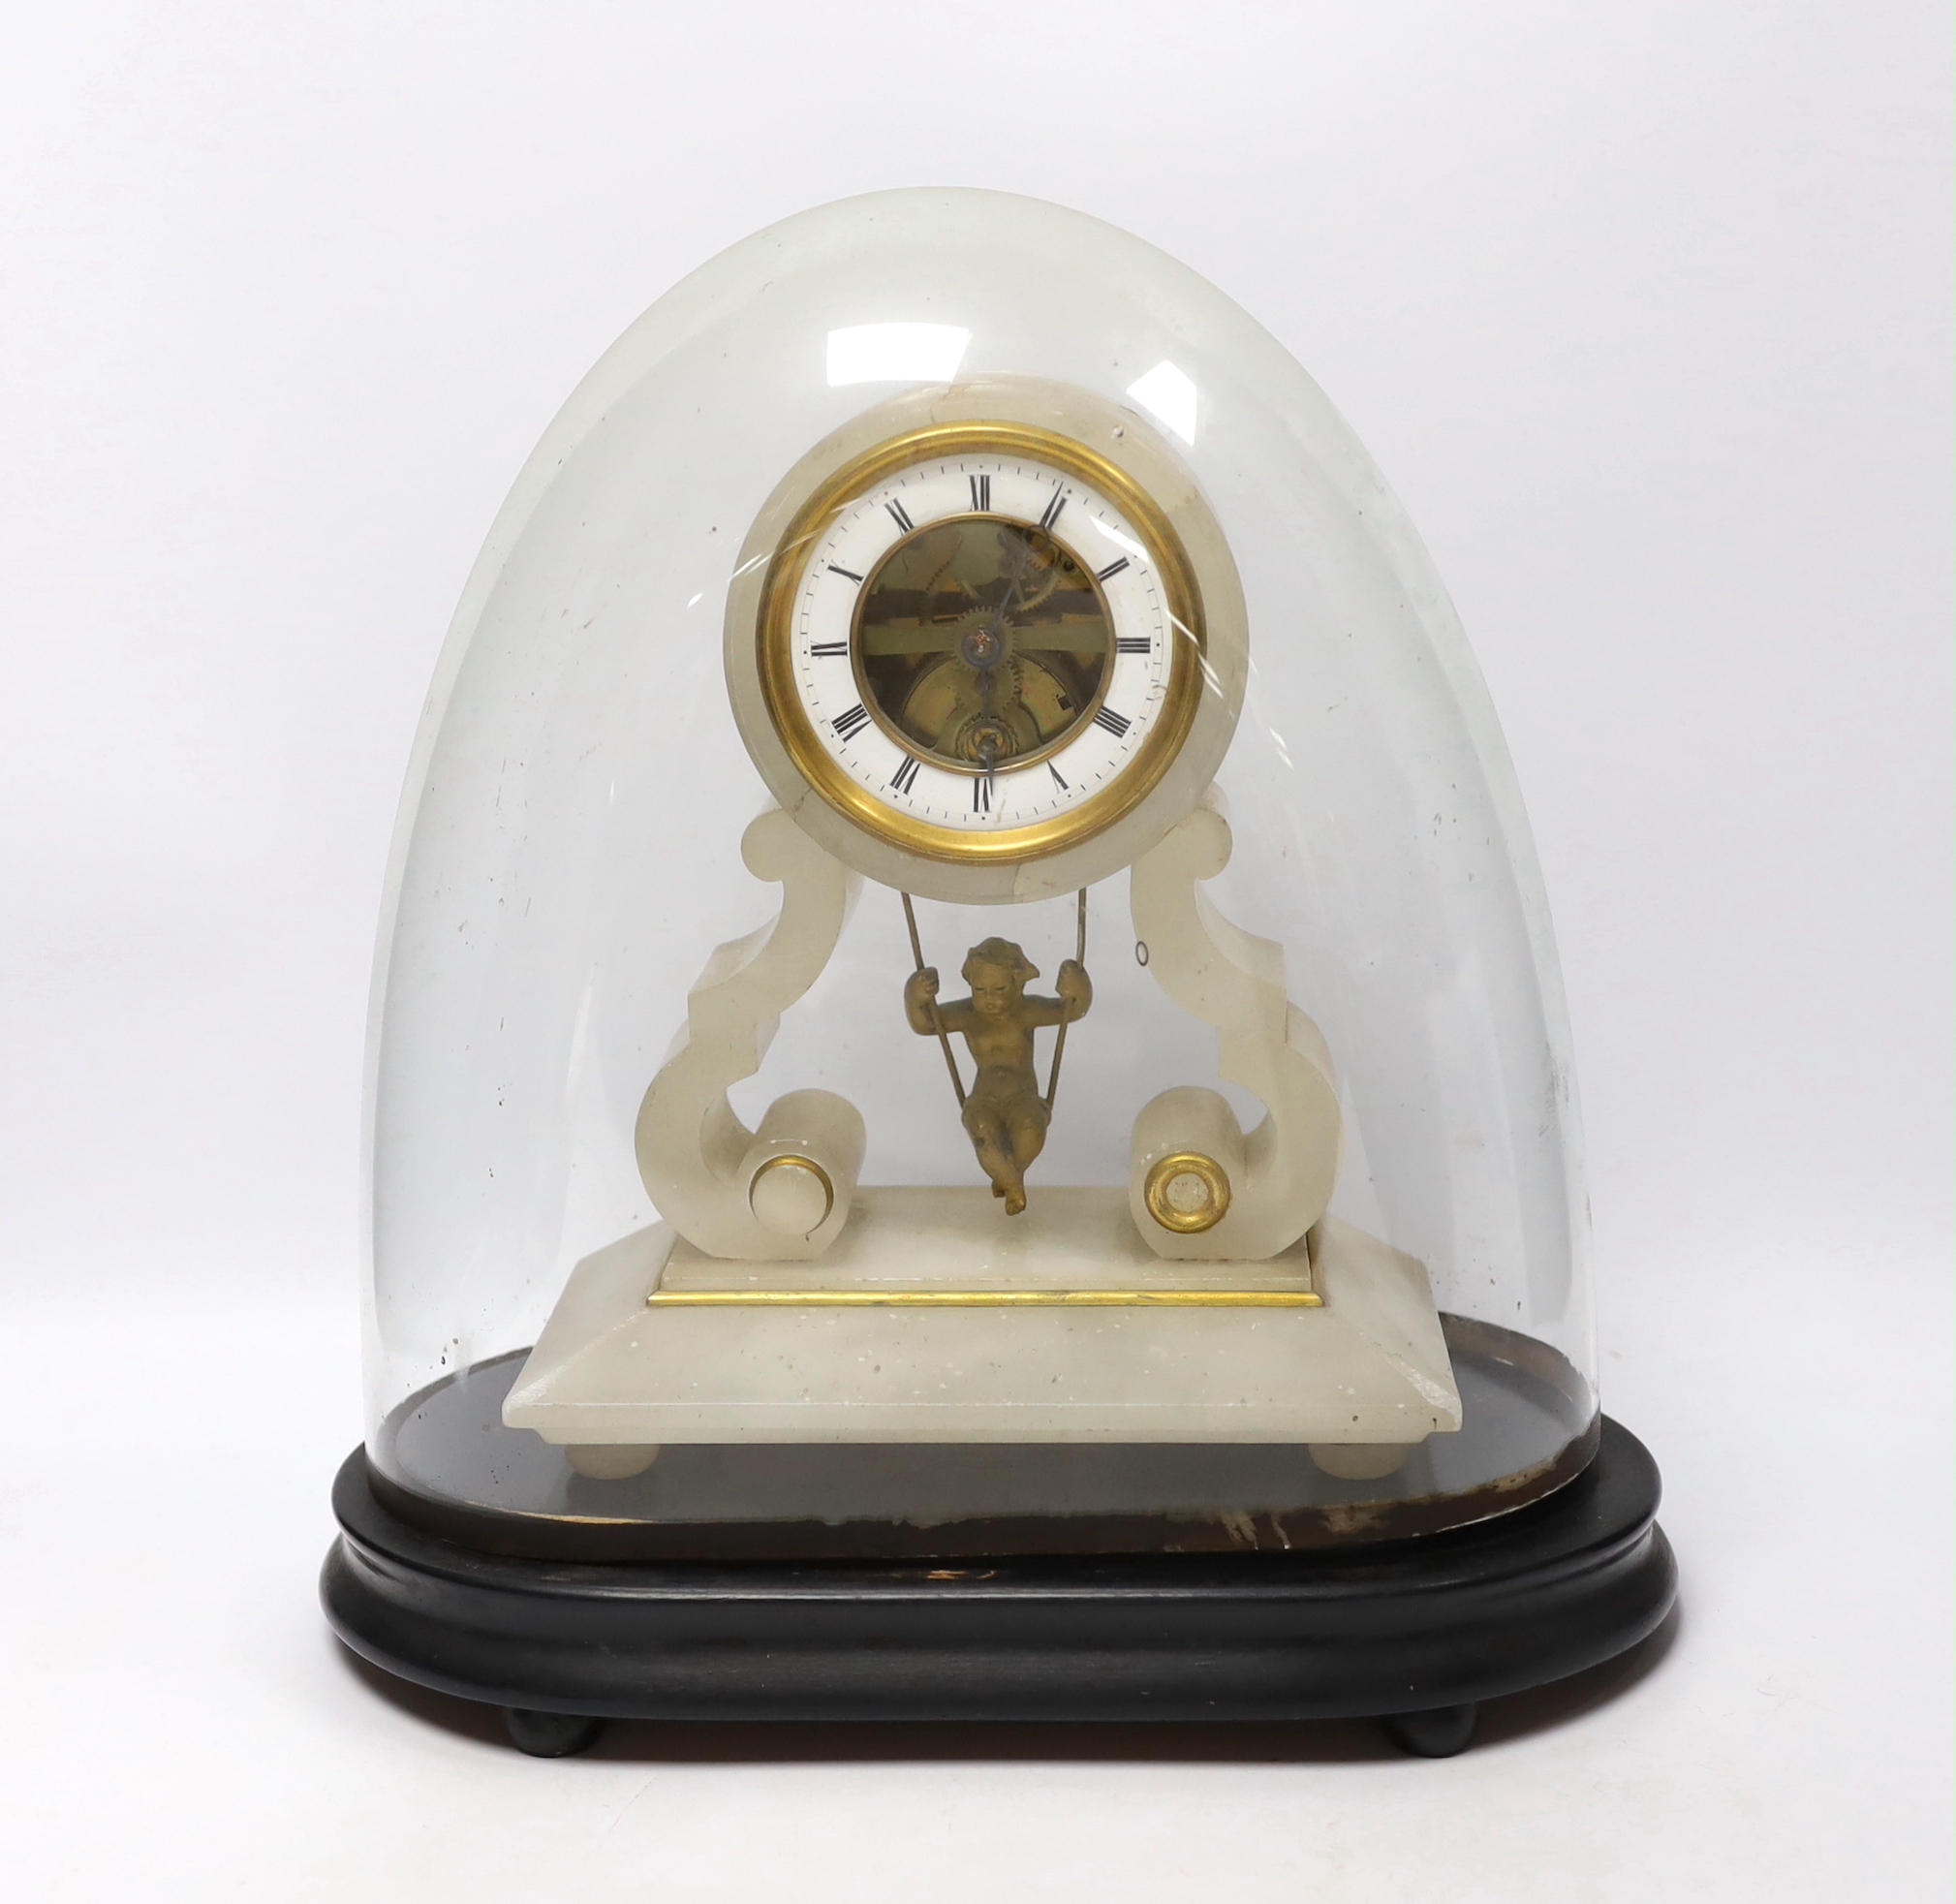 A late 19th century French alabaster and gilt metal mantel clock, with ebonised stand and glass dome, total height 32.5 cm